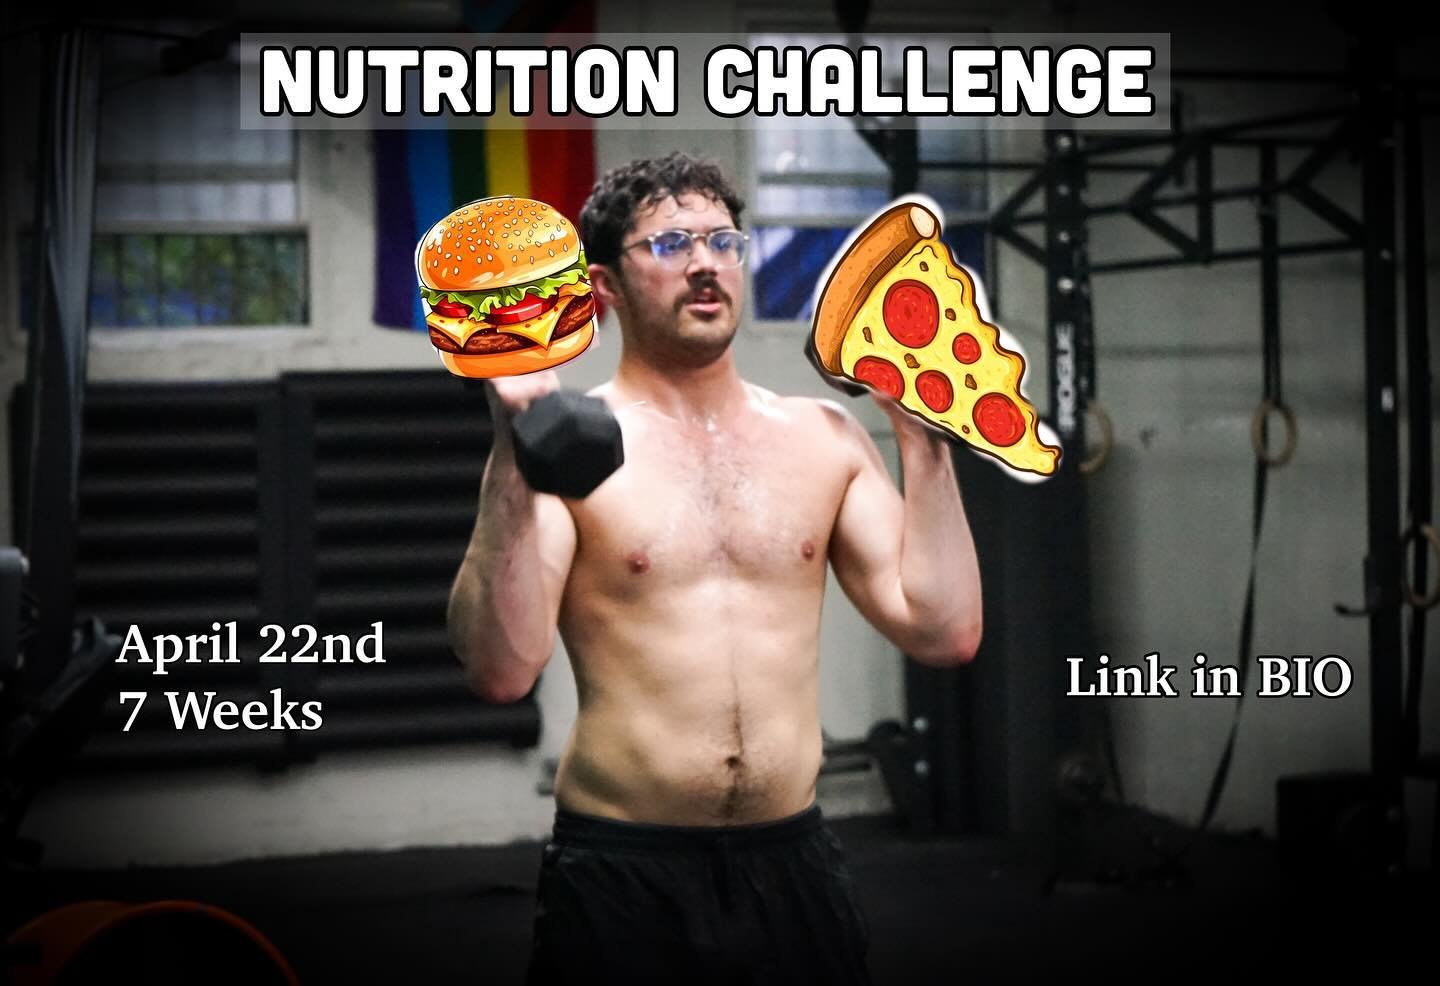 Howdy everyone! 
We&rsquo;re starting out Nutrition Challenge next Monday! If you&rsquo;re not excited yet, you SHOULD BE!! 😉

What we will been doing these 7 weeks: 💪🥬

1. Set attainable, realistic, weekly goals
2. Weekly check-ins to keep you ac